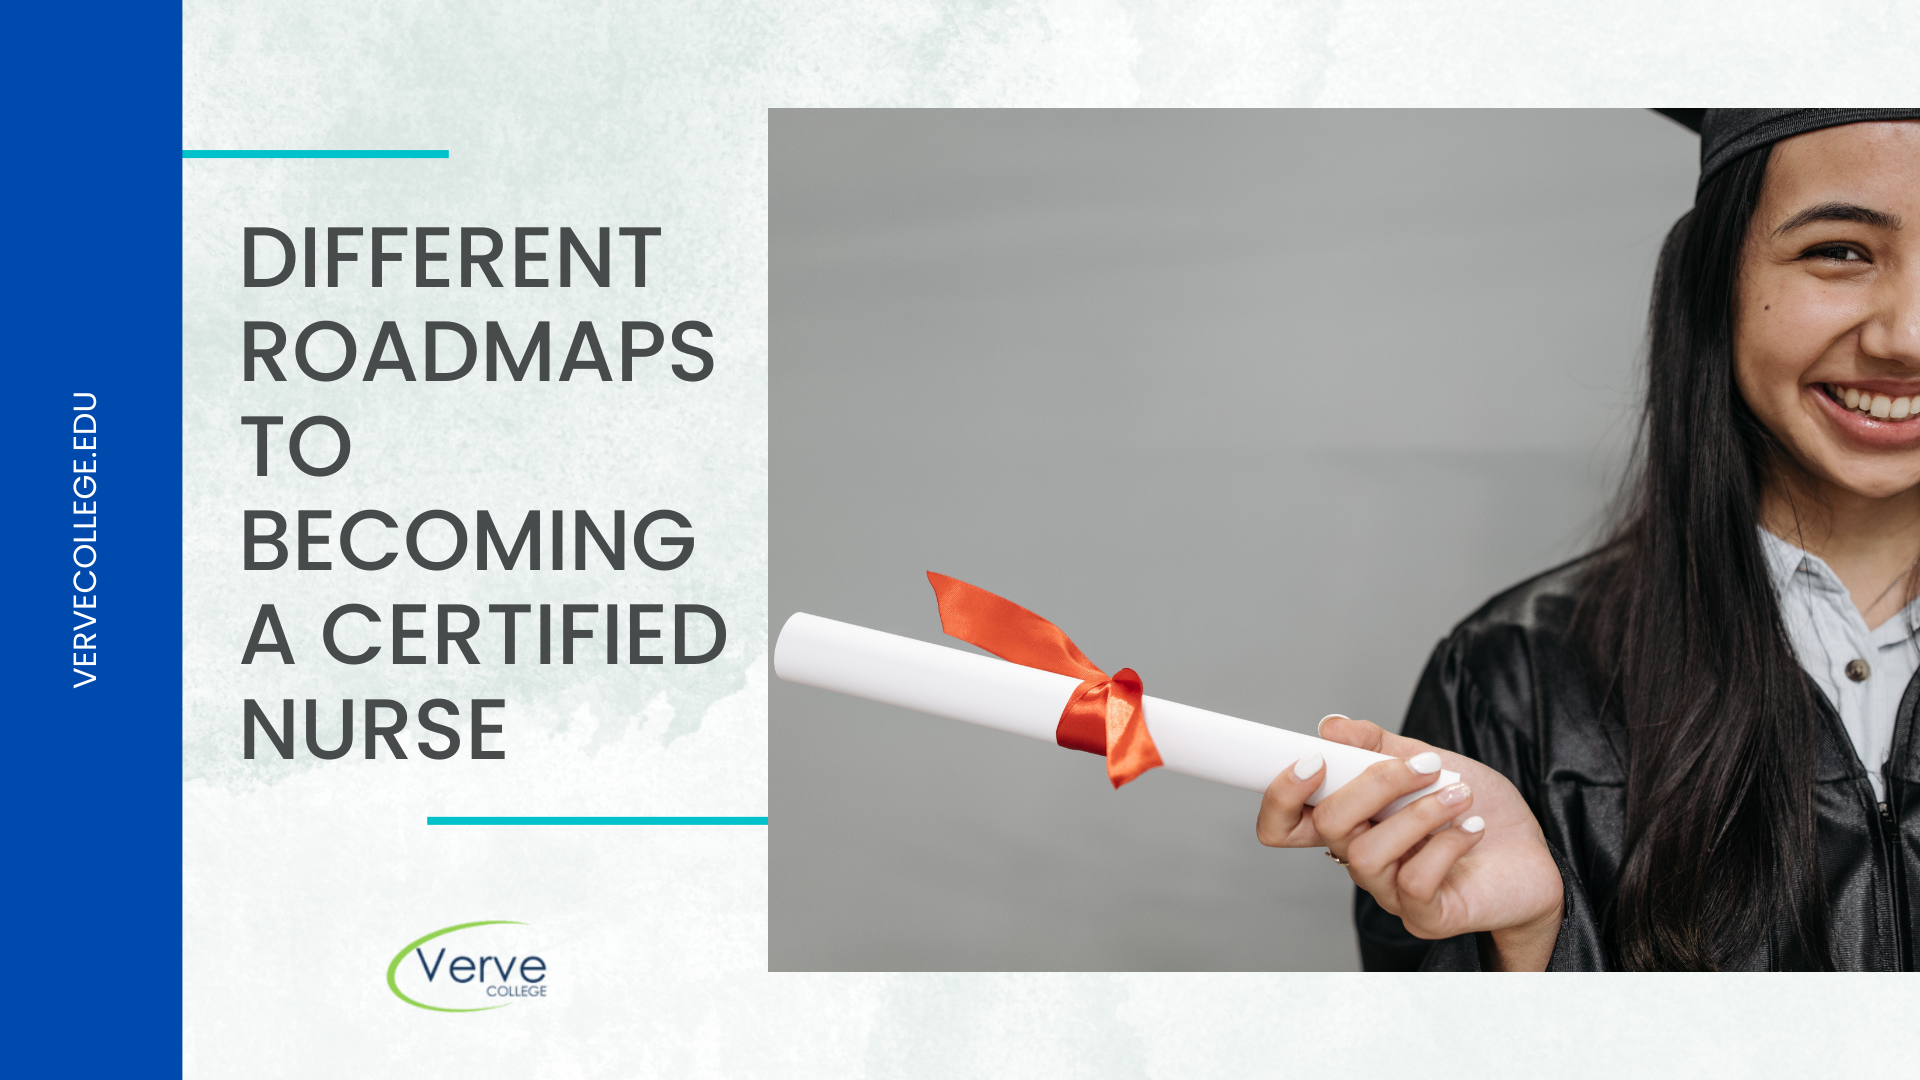 Different Roadmaps to Becoming a Certified Nurse